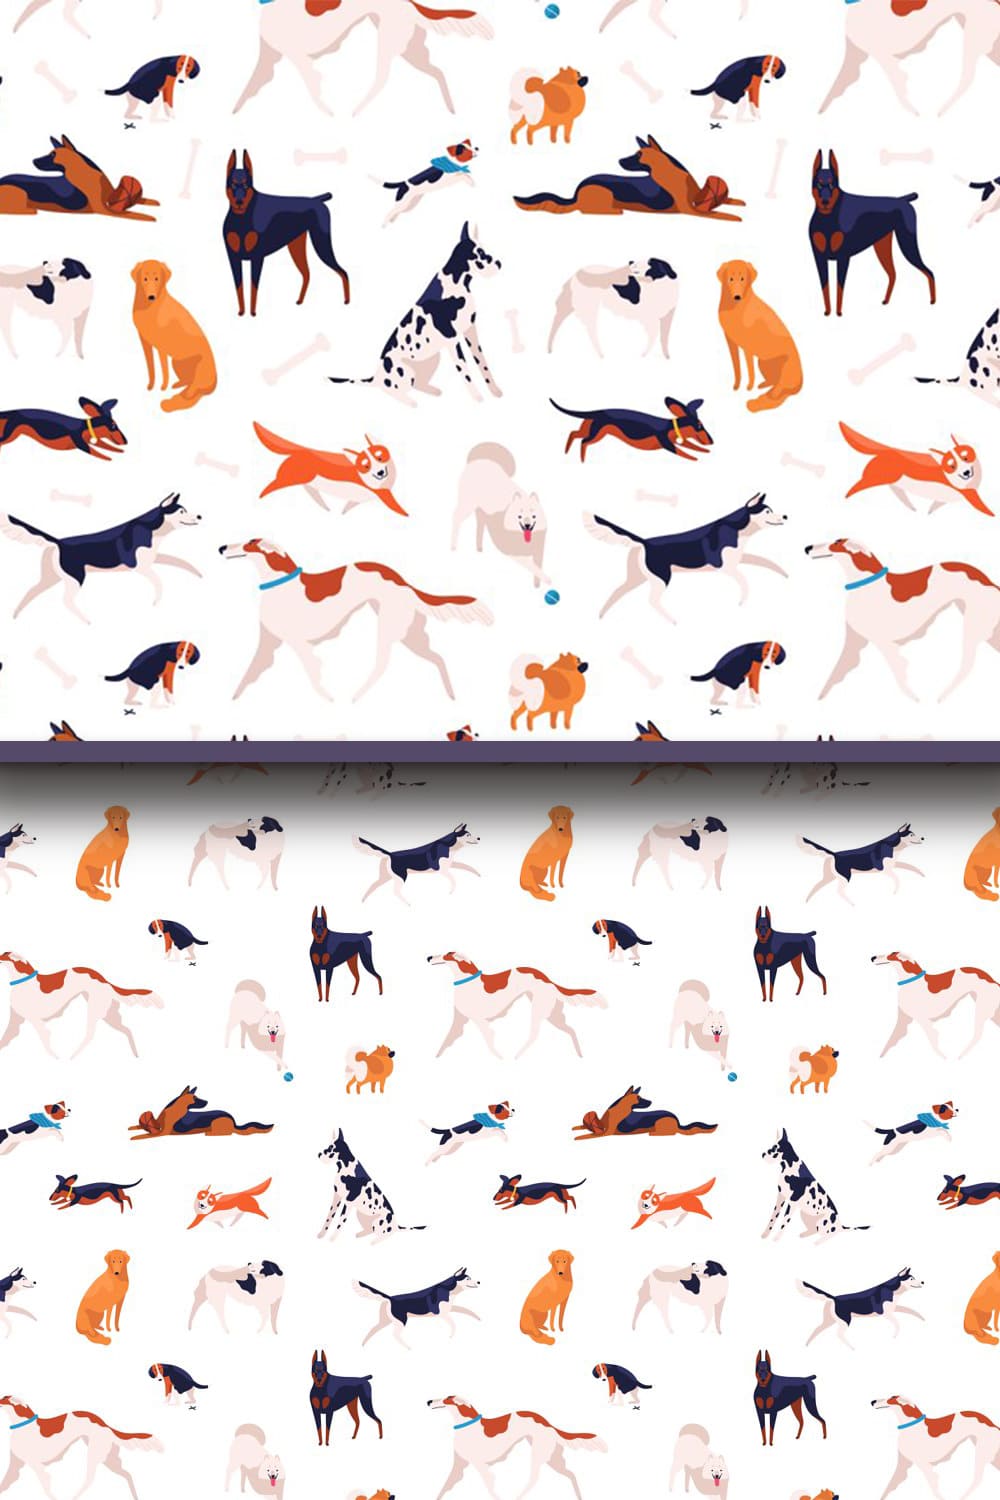 Different Dogs Seamless Patterns.